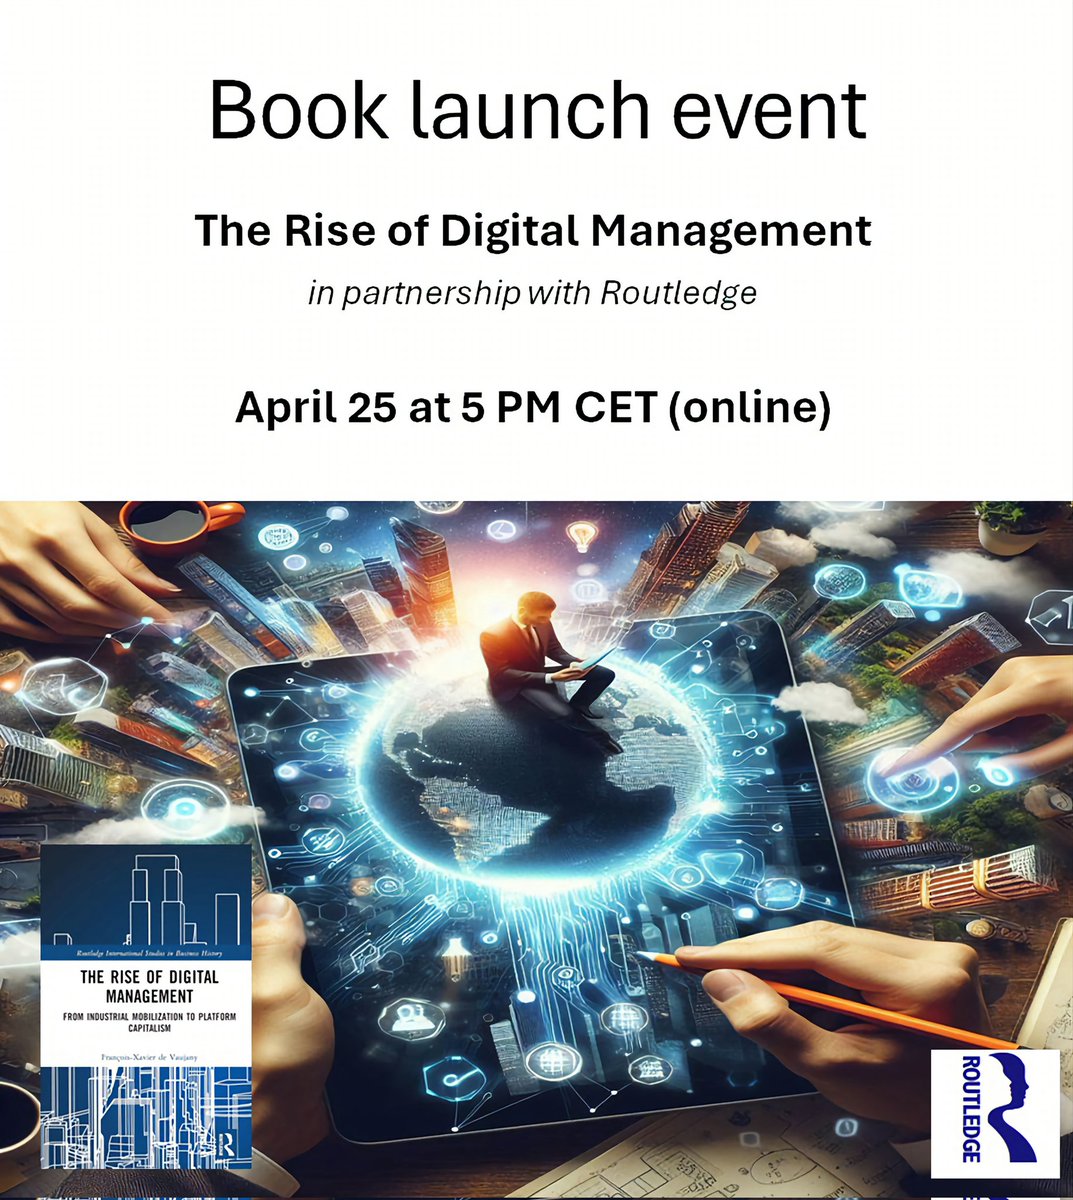 ➡️ Already 200 people registered! Join us for the online book launch event of 'The Rise of Digital Management' by @fdevaujany (April 25 at 5 PM CET). Registration: lnkd.in/eCeupF_G #TheRiseofDigitalManagement #ManagerialApocalypse @Paris_Dauphine @routledgebooks